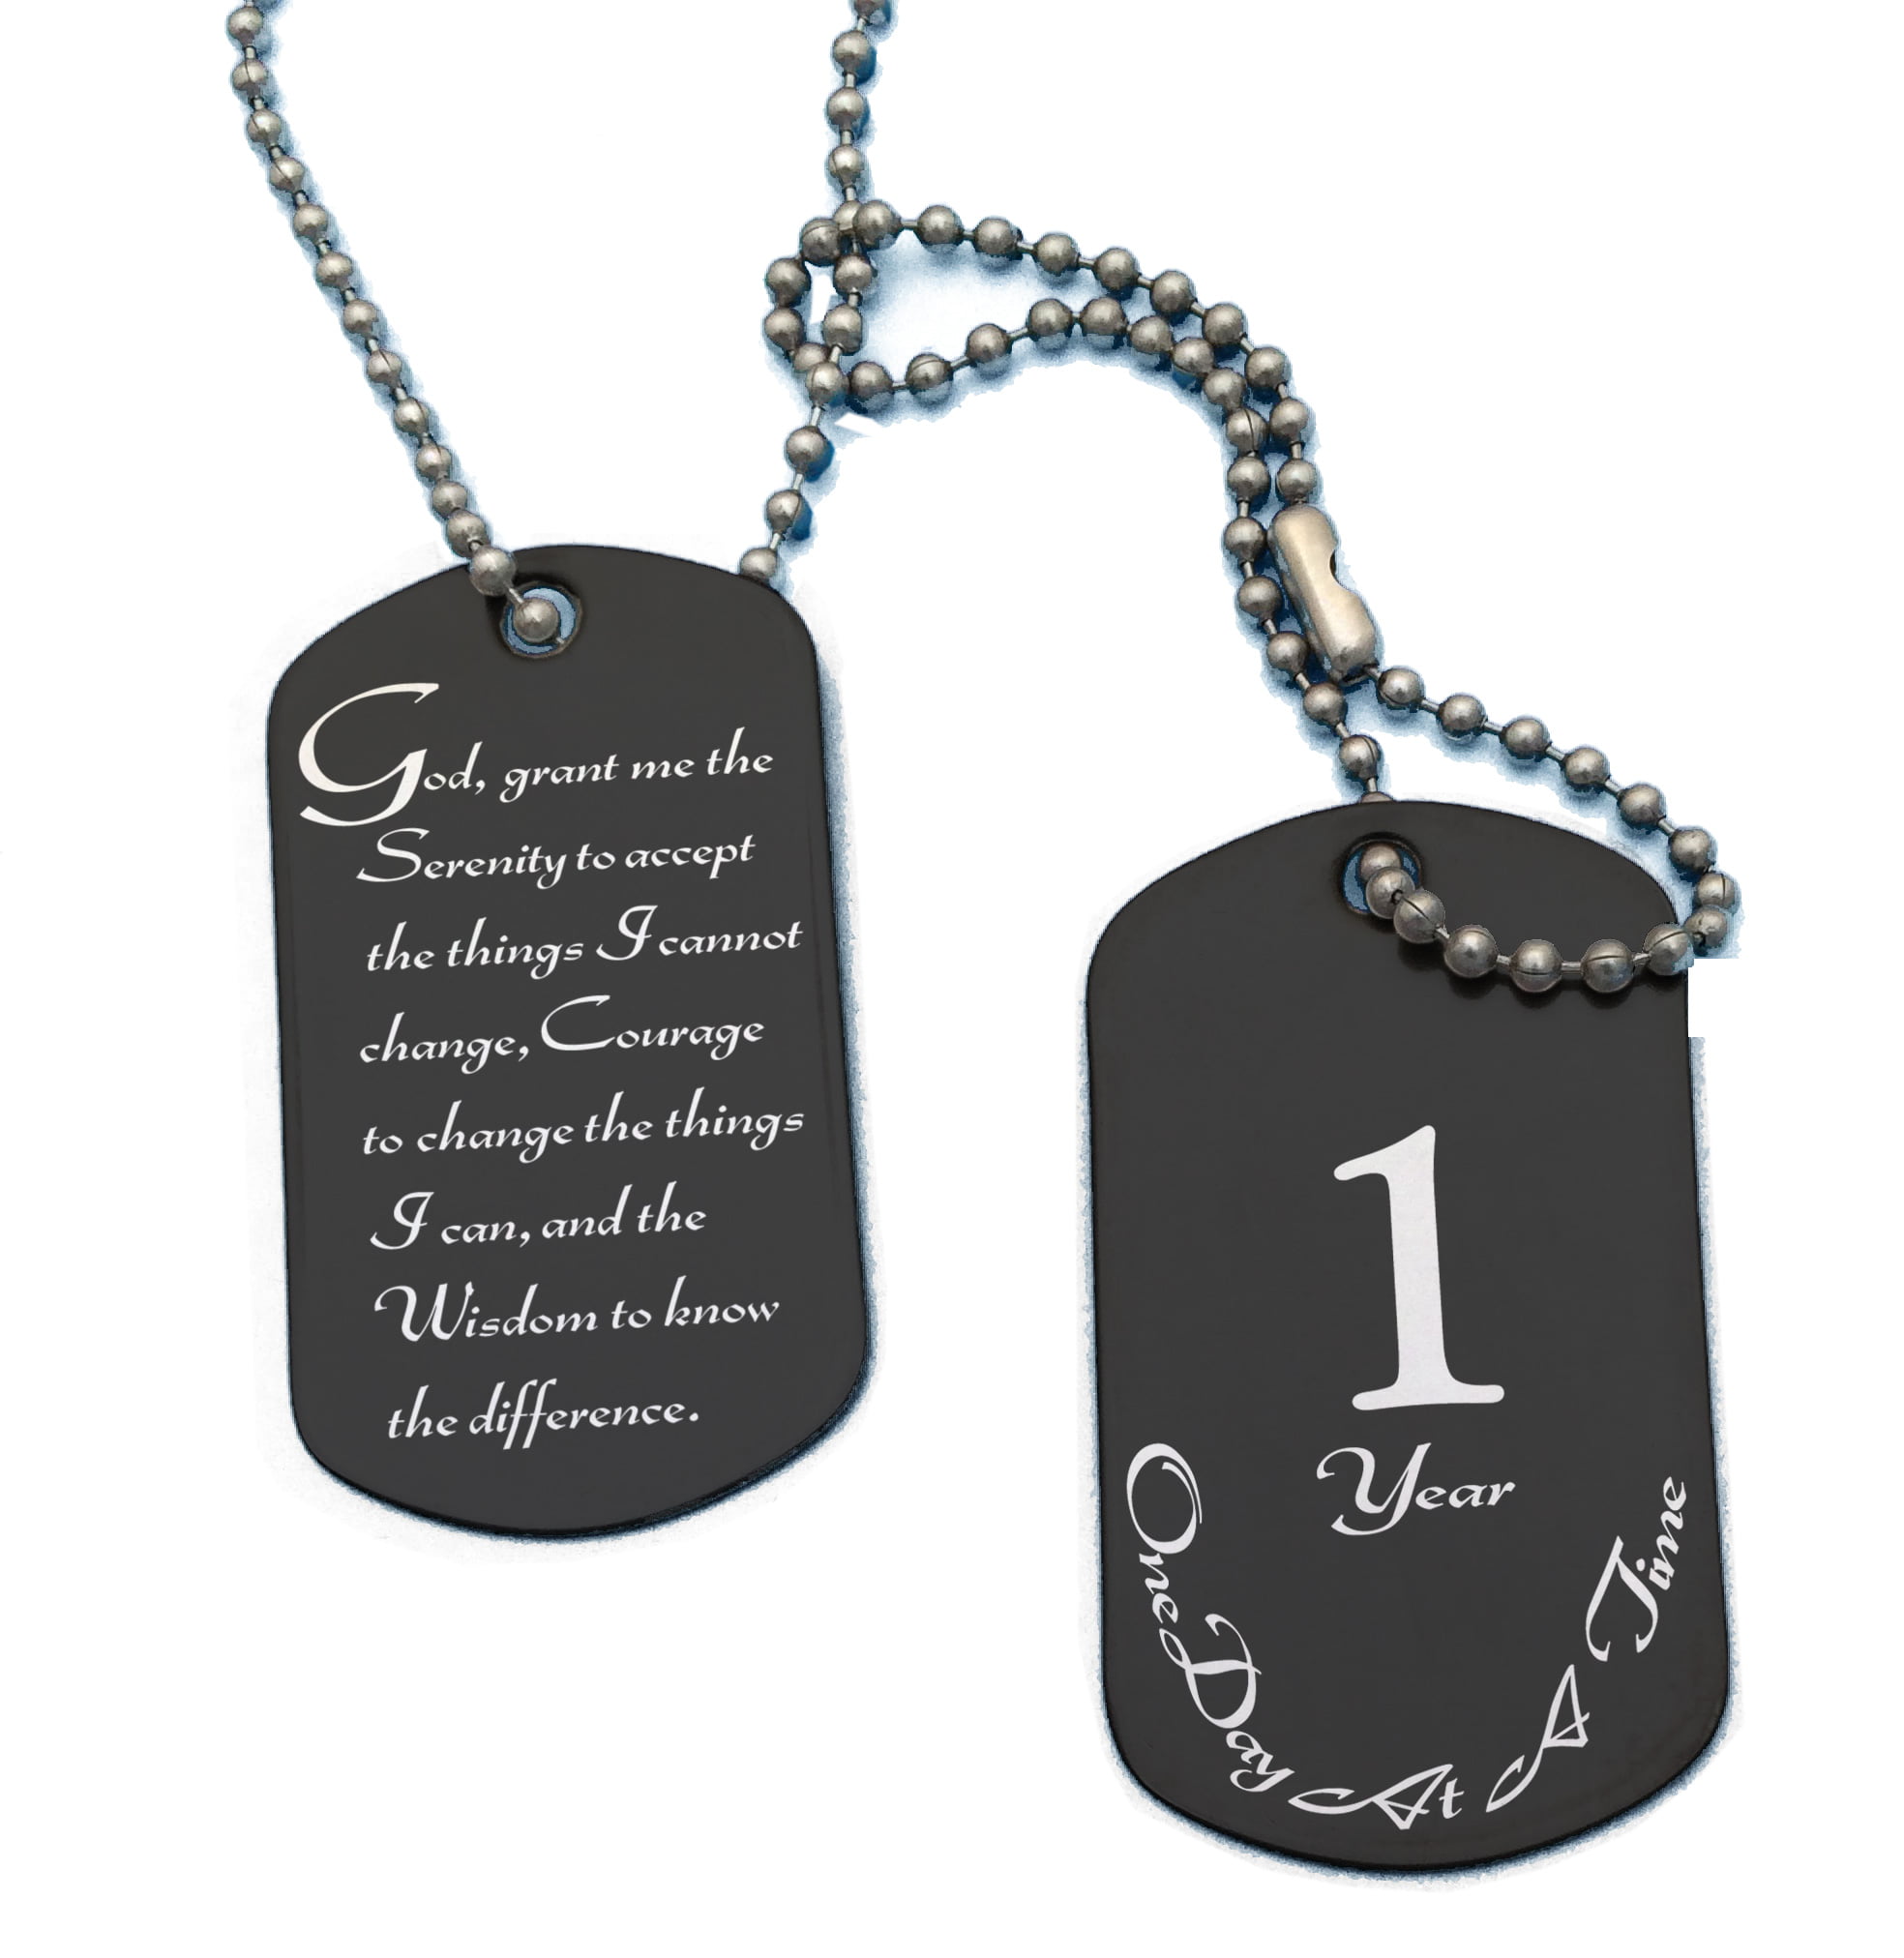 why do soldiers wear two dog tags